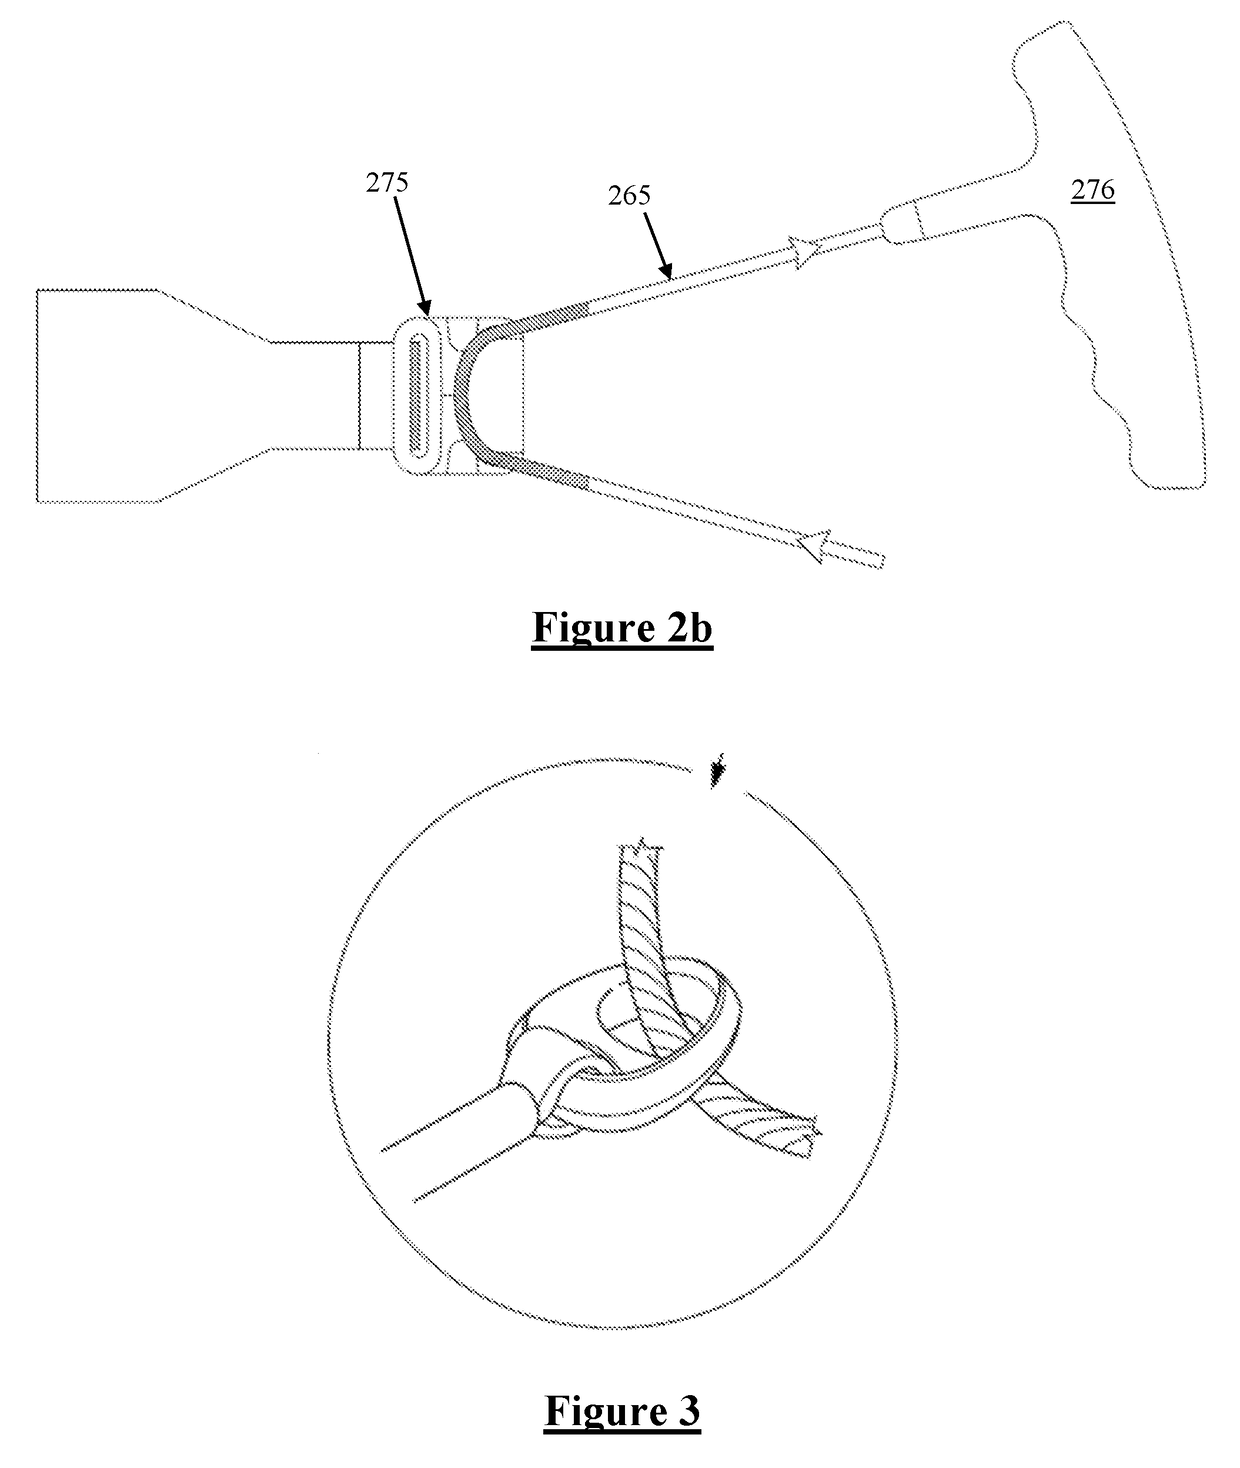 A dual hand controlled device for leg stretching and/or activation